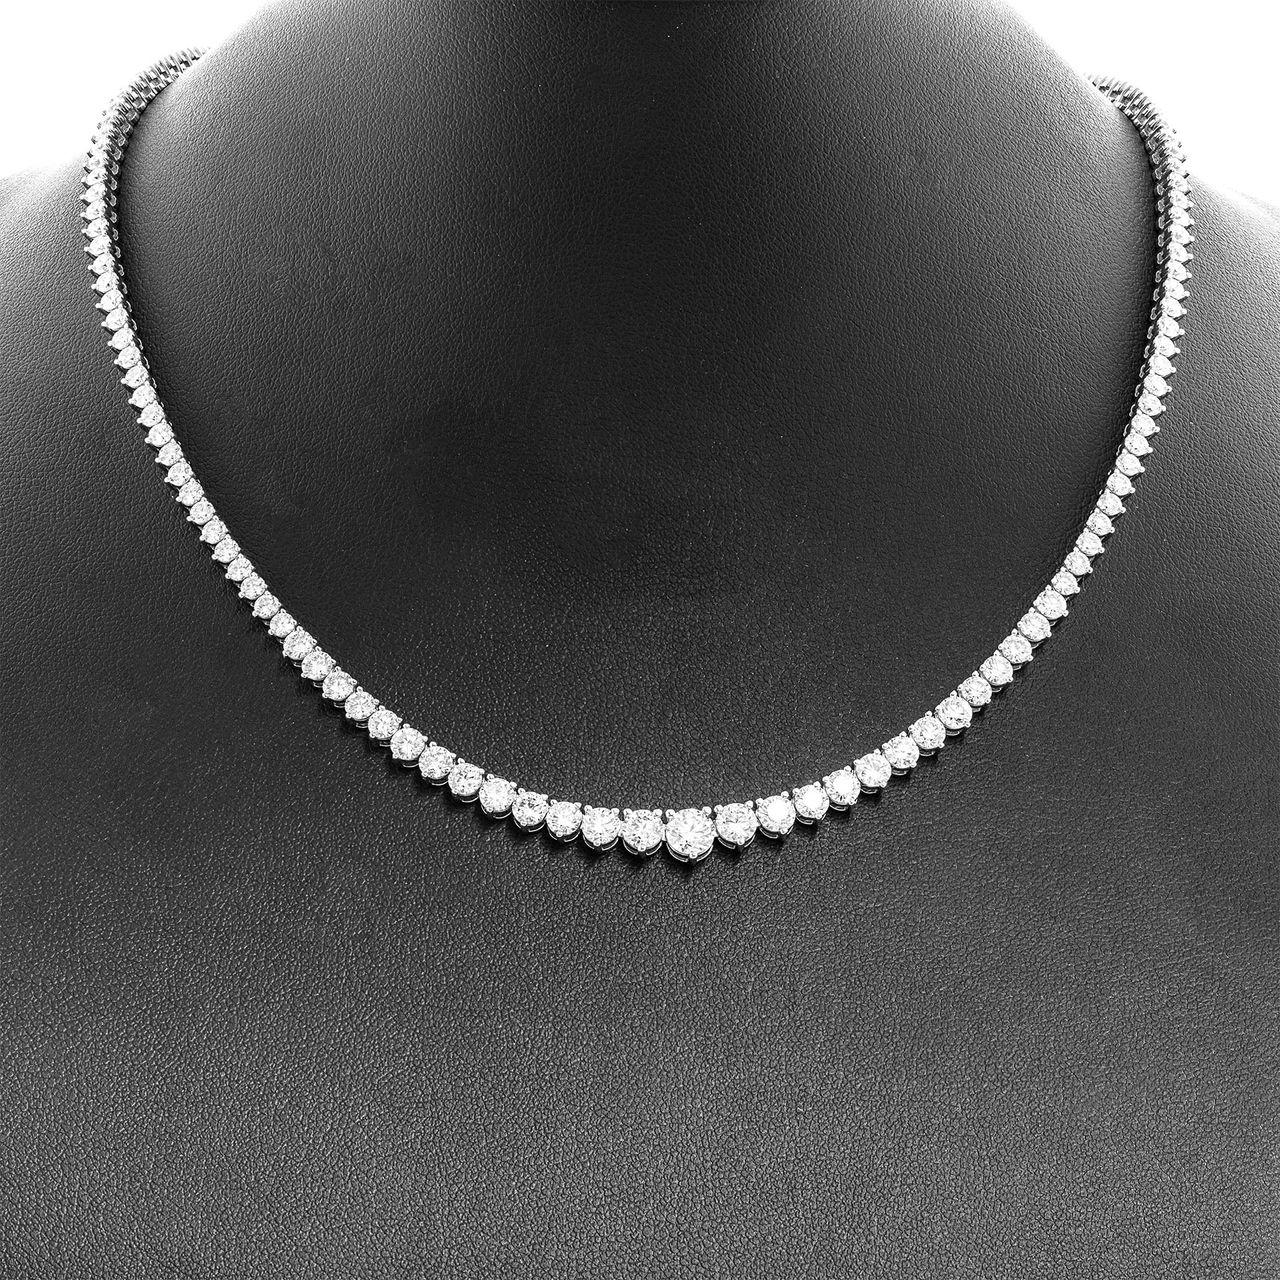 14K White Gold Elegant Graduated Diamond Tennis Necklace 
Total Carat Weight: 8.49ct (165stones) F/G VS 165st, mounted in 14K WG 3 prong settings;
3 Center Stones are certified :
0.37ct H VS2 GIA#6412737118 
0.37ct H VS2 GIA#2444479659 
0.50ct H VS2